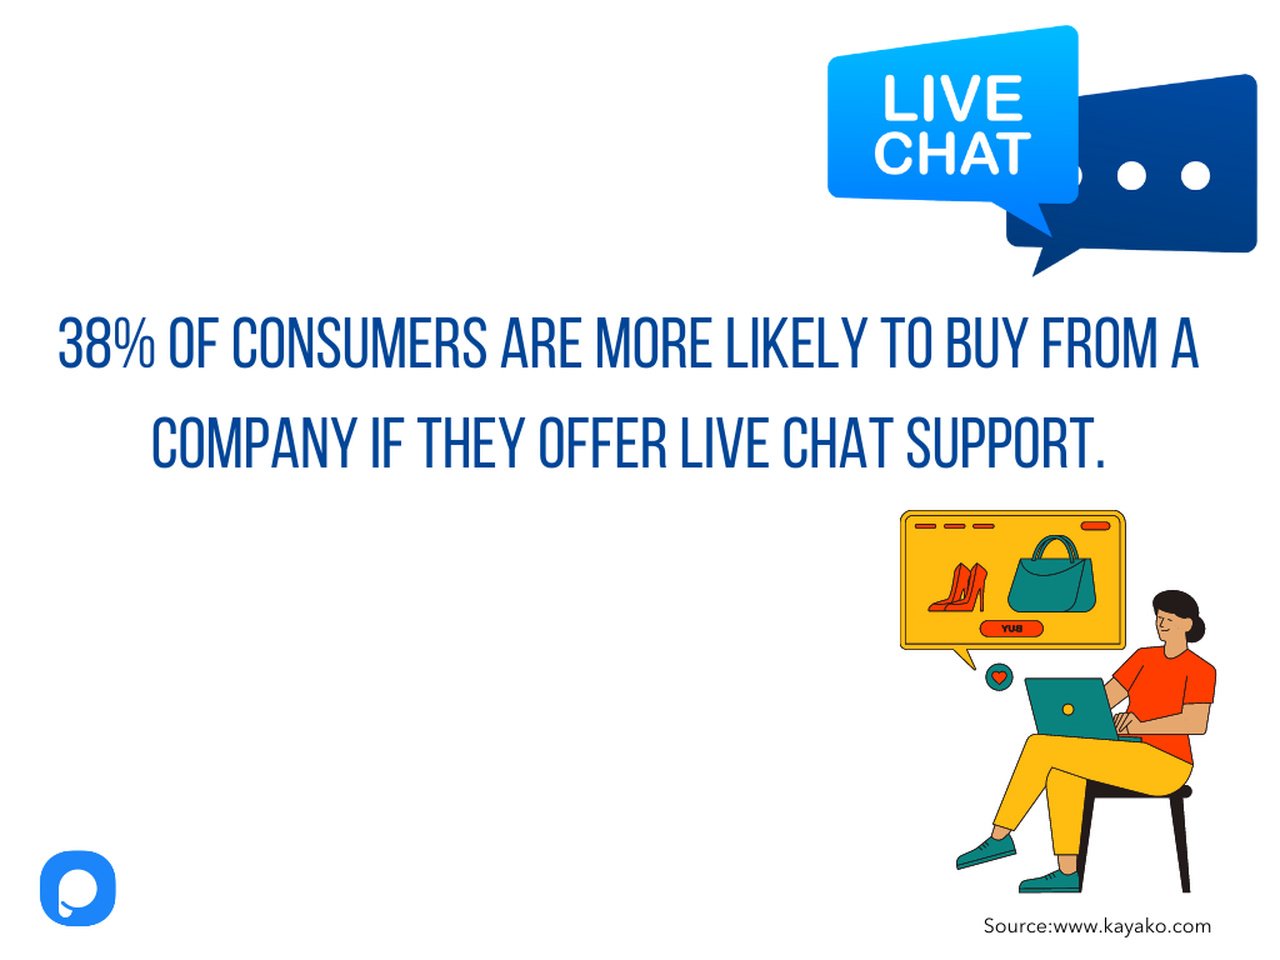 an image of live chat conversion statistic in the center with the illustration of a woman sitting on a chair with her laptop on her lap doing online shopping in the right hand bottom corner and live chat bubbles in the right upper corner